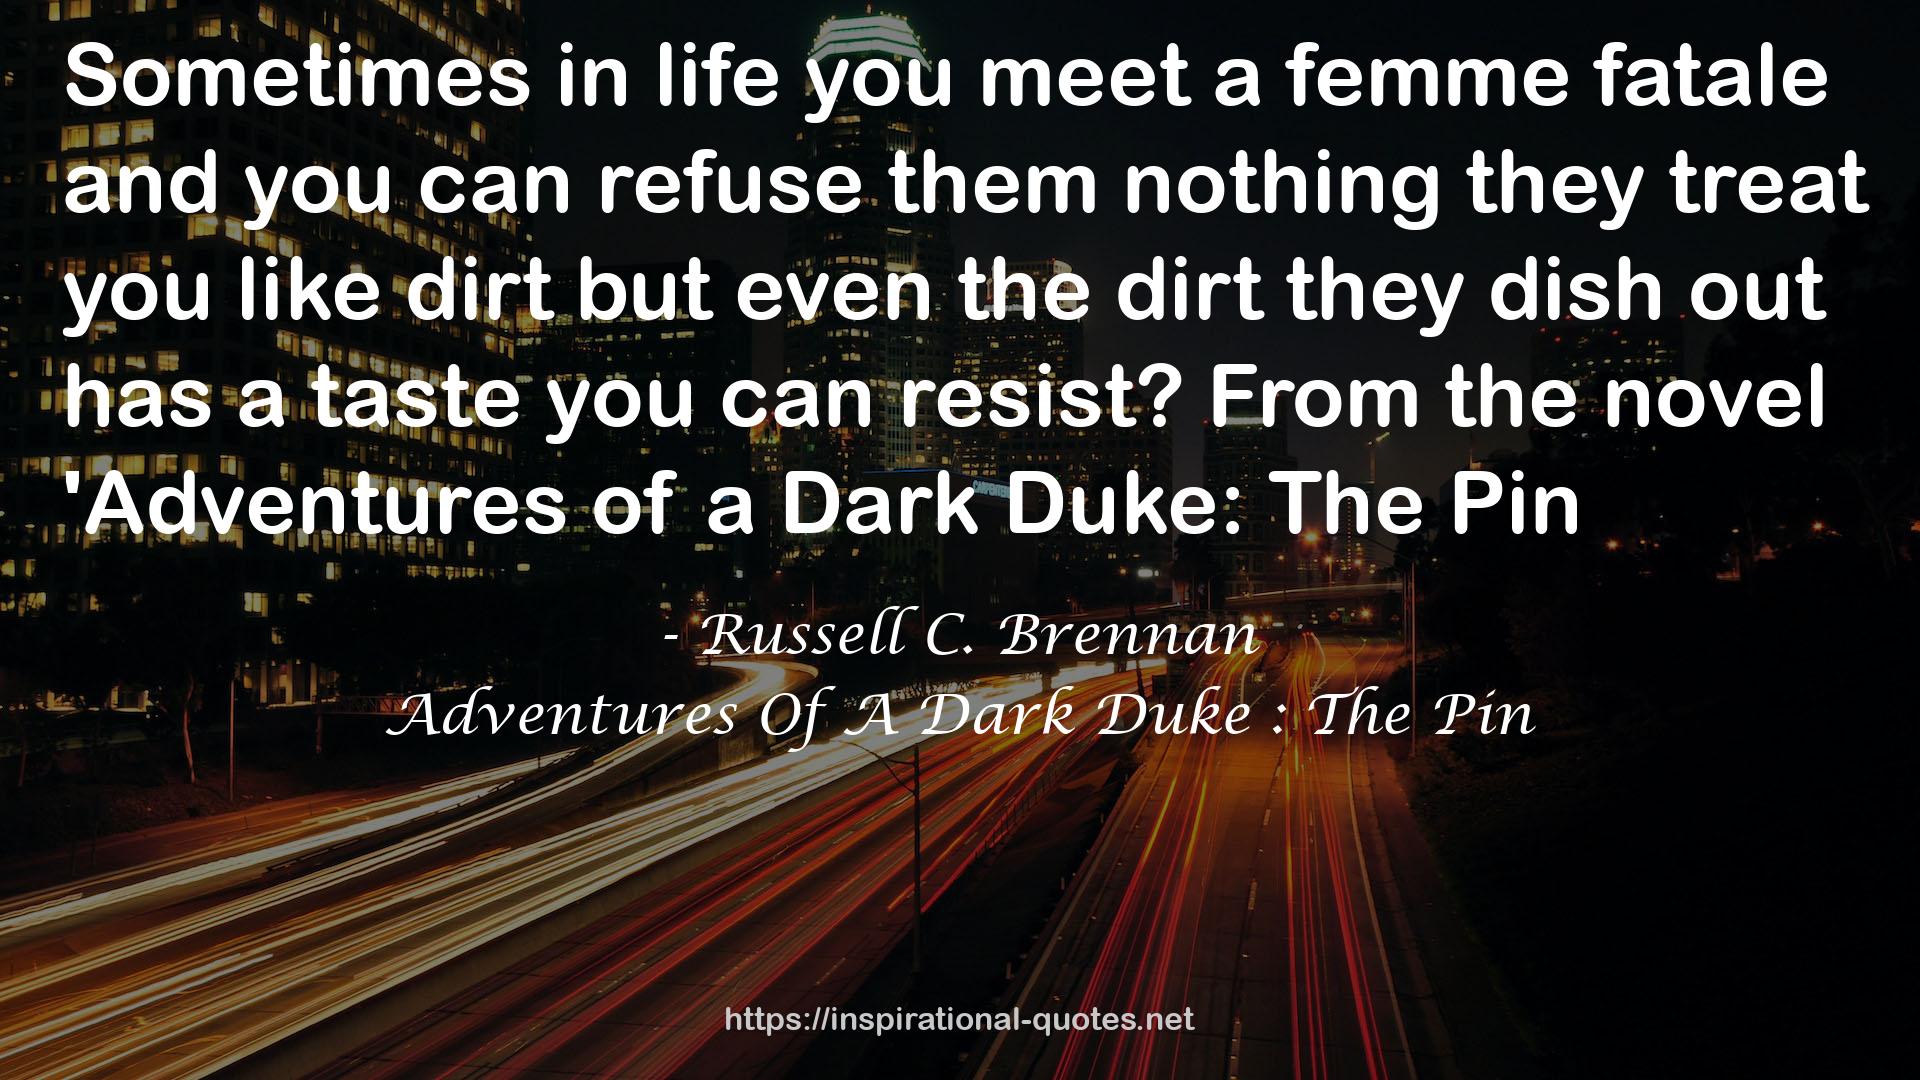 Adventures Of A Dark Duke : The Pin QUOTES